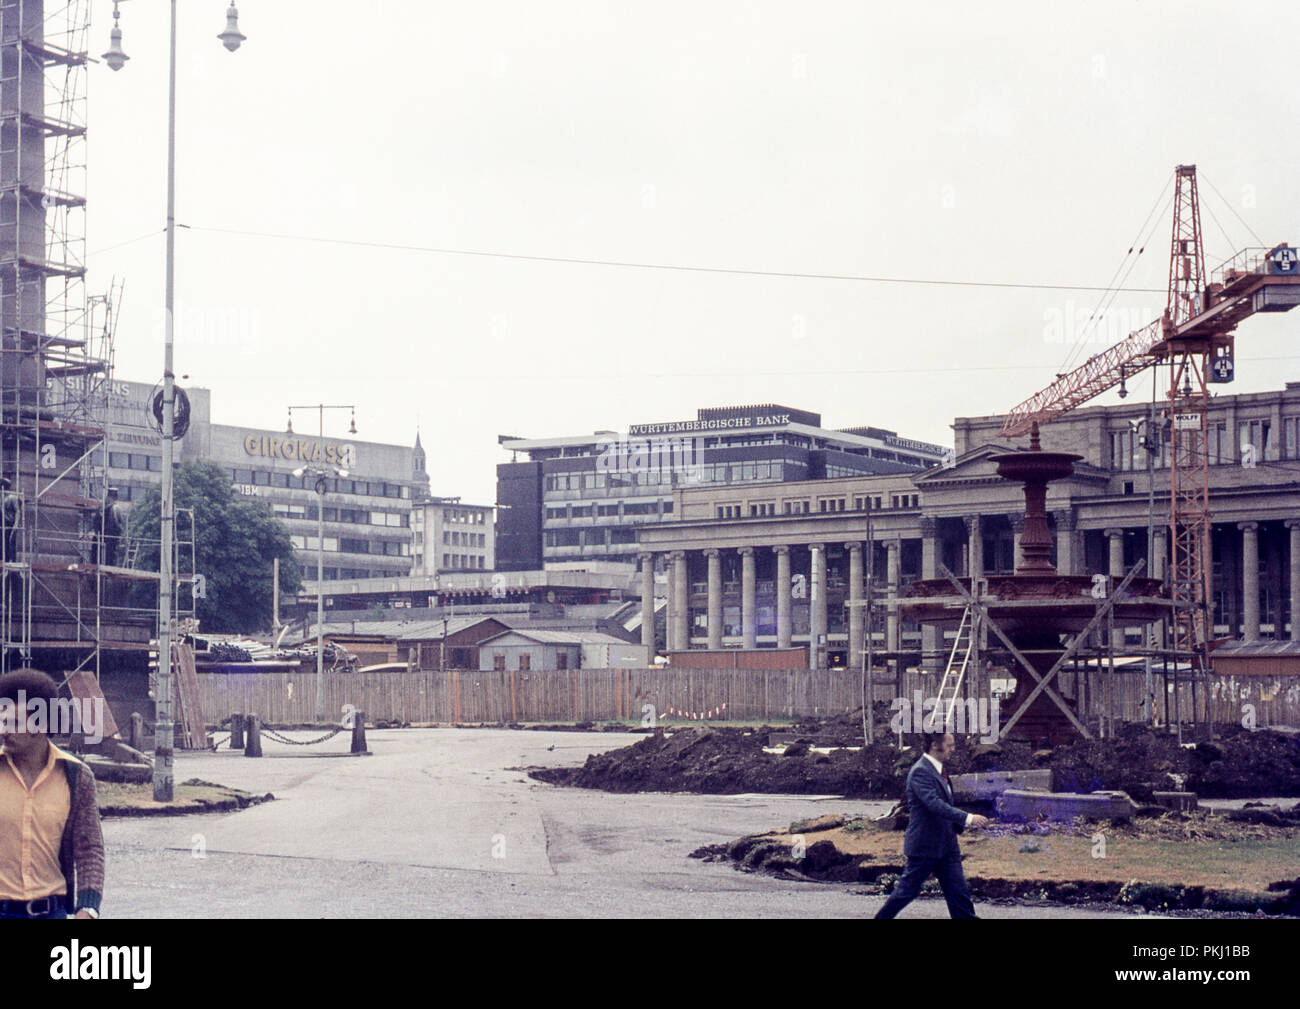 Archive photo taken in 1977 of the renovation of The Schlossplatz in Stuttgart, Germany. The main building which can be seen here is The Königsbau and Fountain. Stock Photo